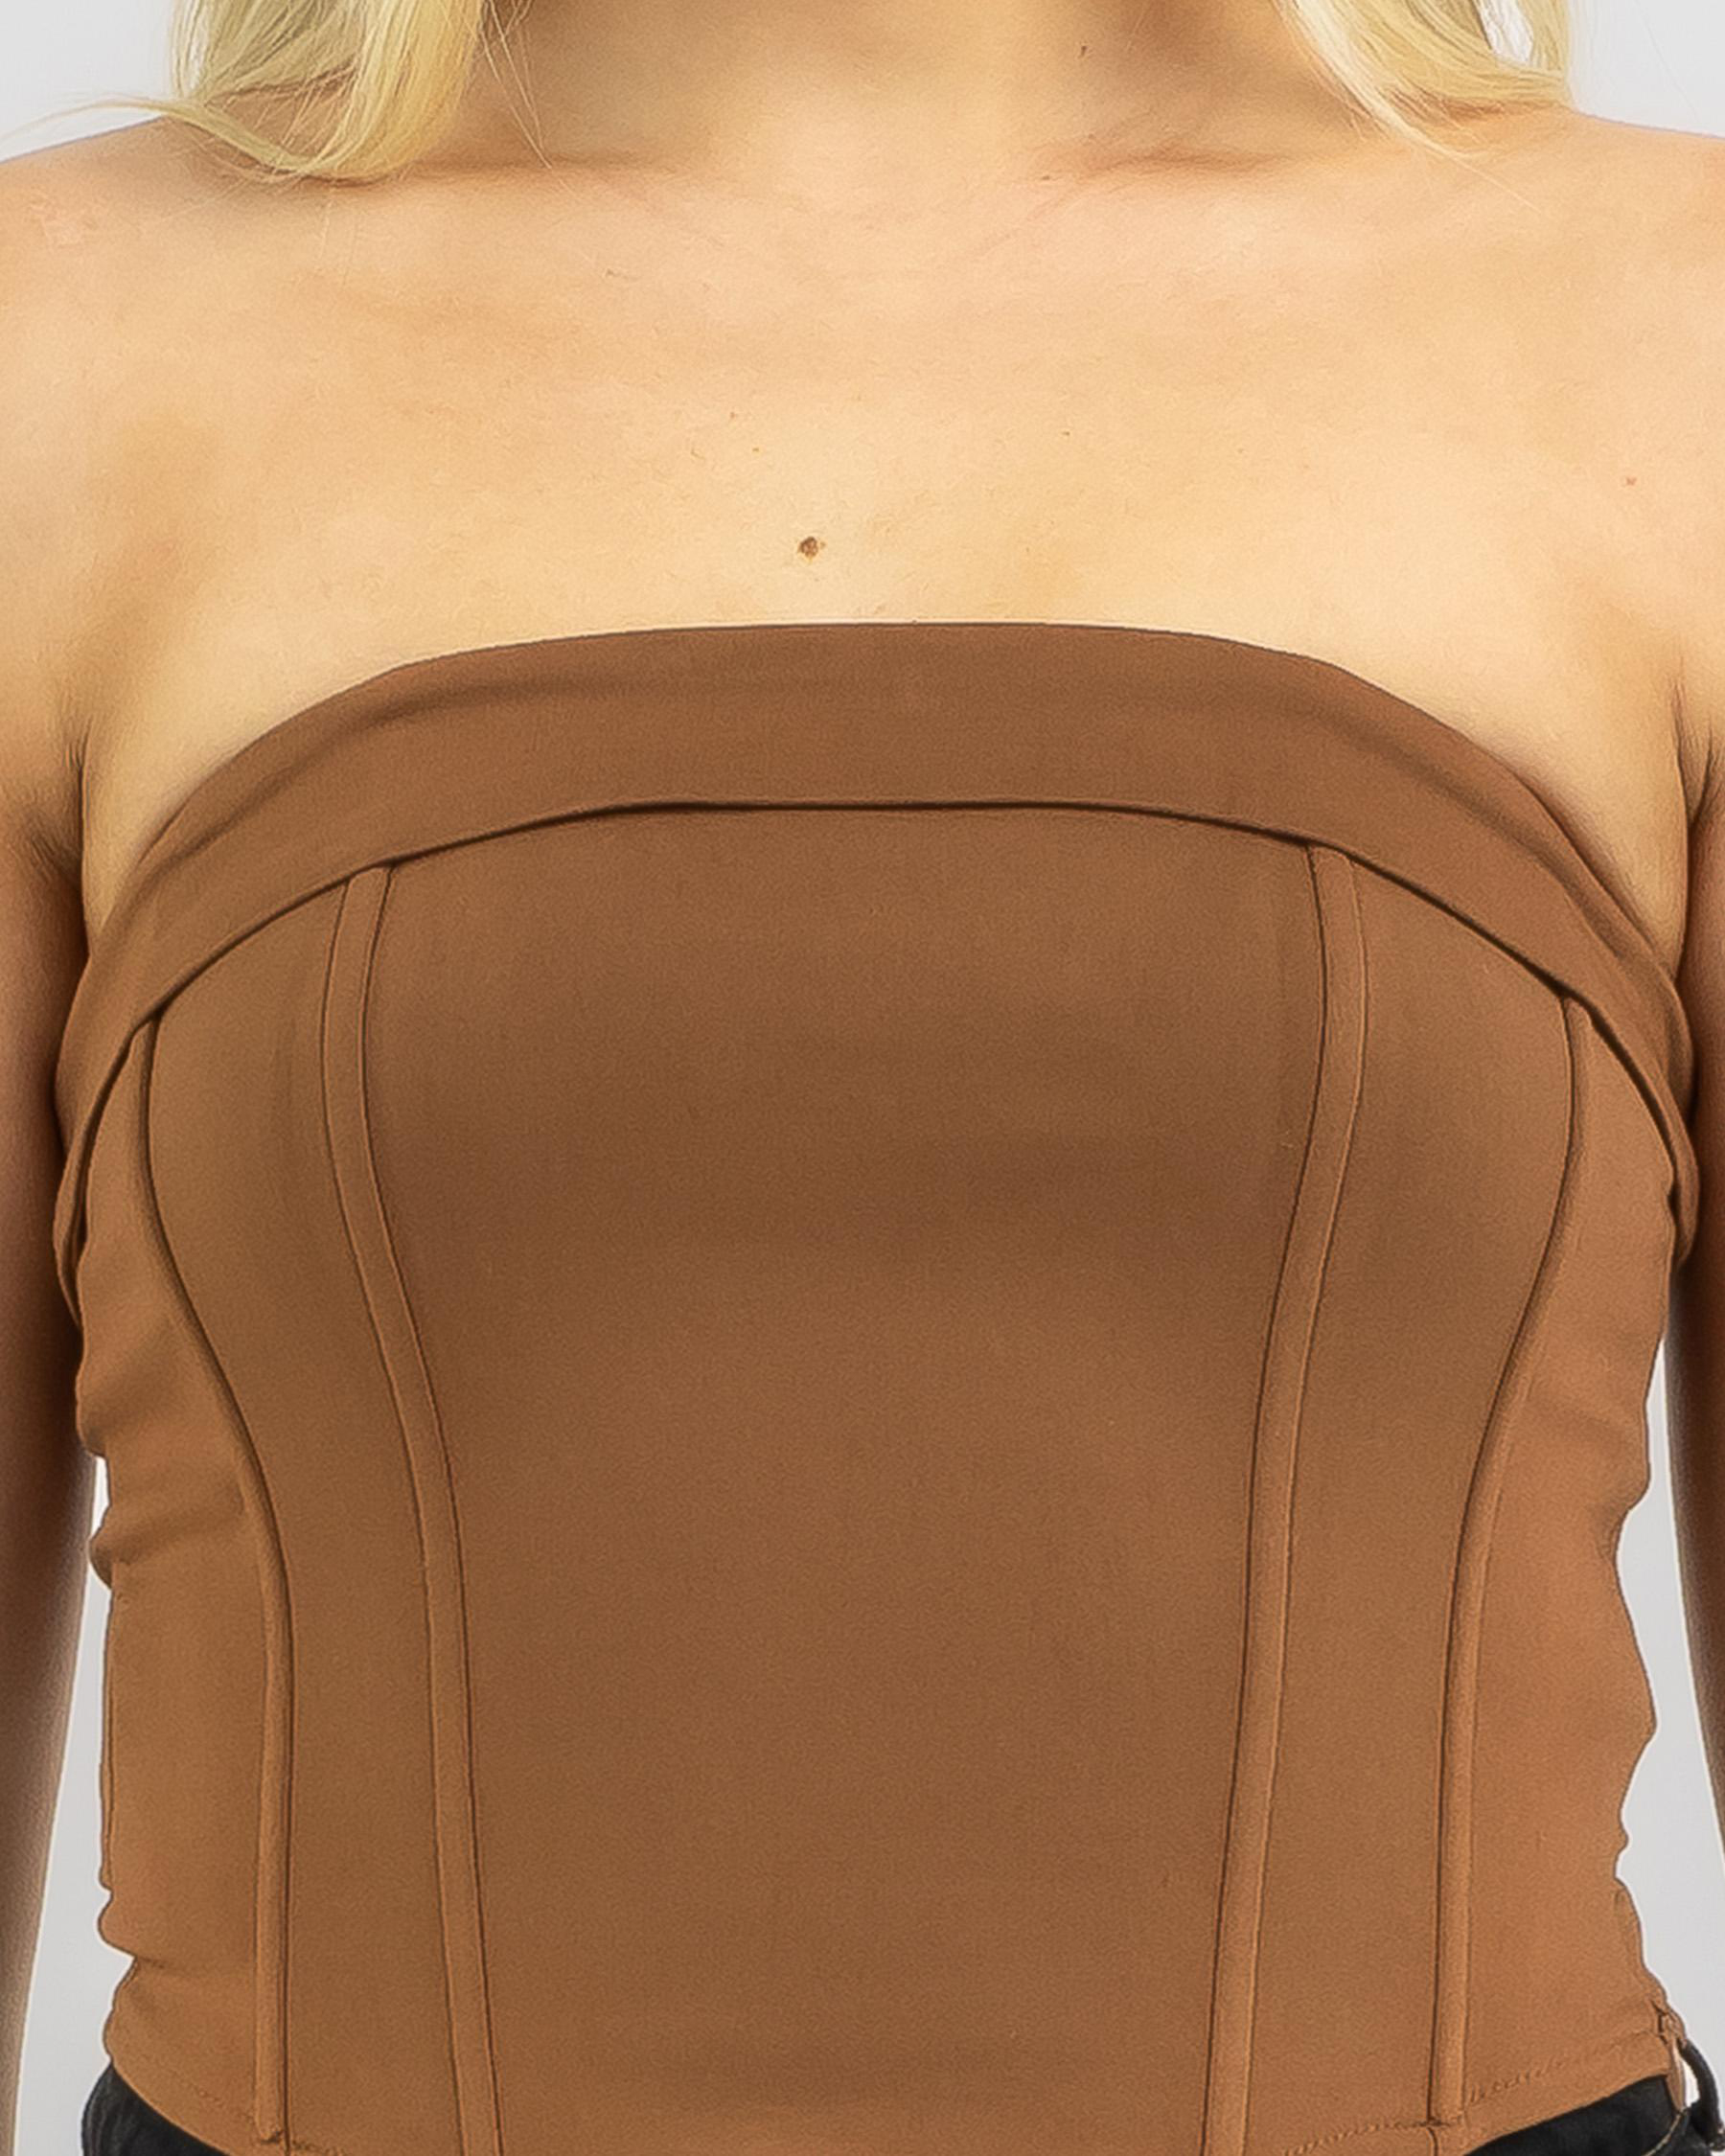 Ava And Ever Miami Vice Corset Top In Chocolate - Fast Shipping & Easy ...